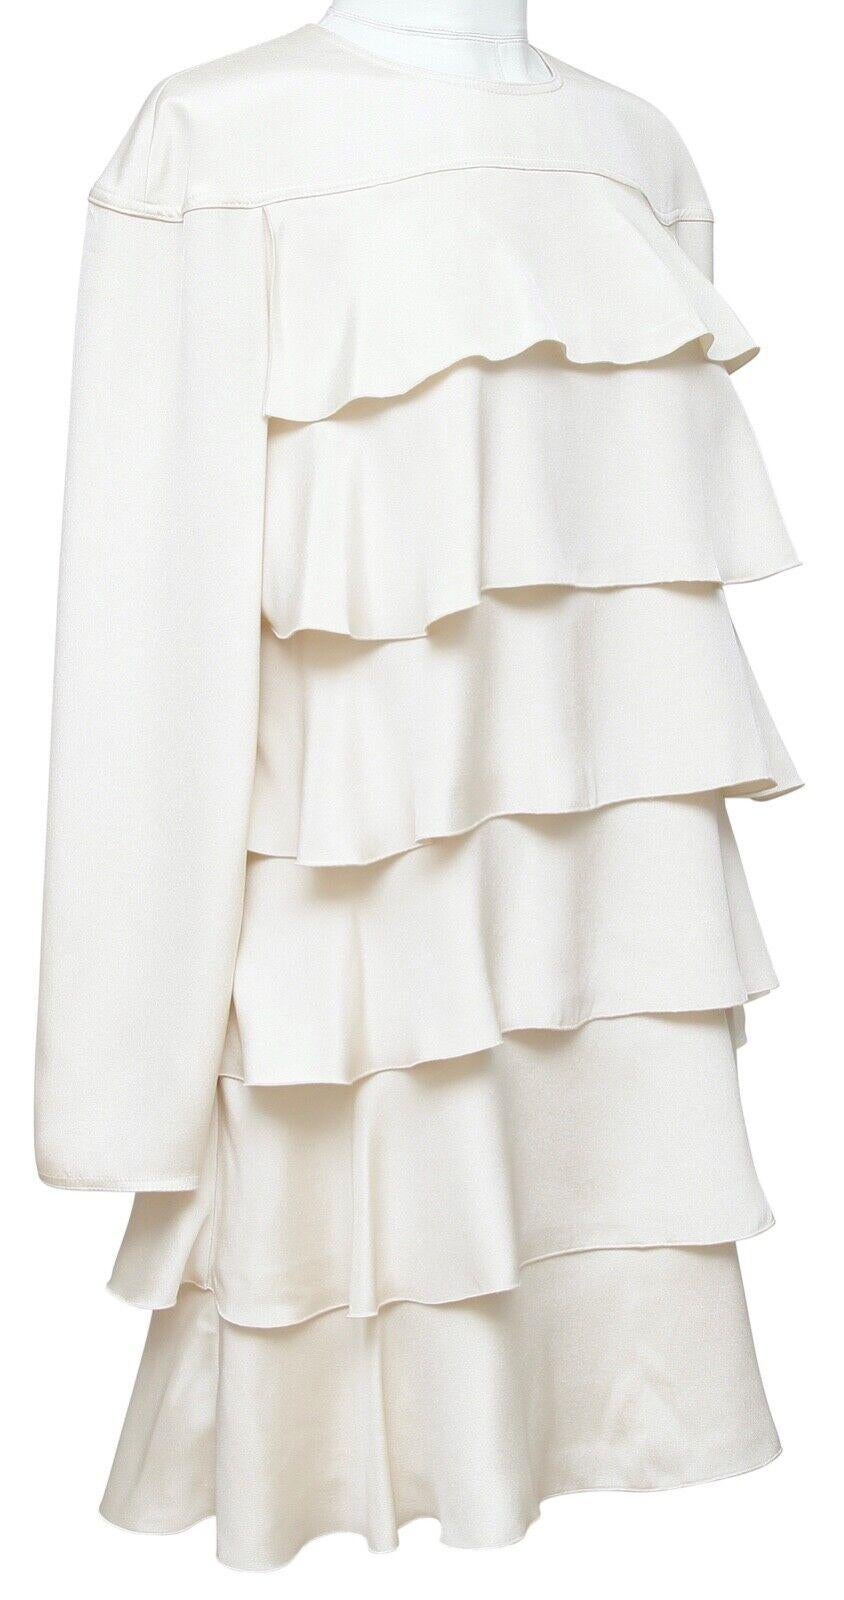 GUARANTEED AUTHENTIC VALENTINO LONG SLEEVE SILK DRESS

 Details:
 • Ivory silk dress.
 • Long sleeve.
 • Crew neck.
 • Tiered design.
 • Rear covered lower zipper closure with open top area and button at back neckline.
 • Lined.

 Fabric: 100%